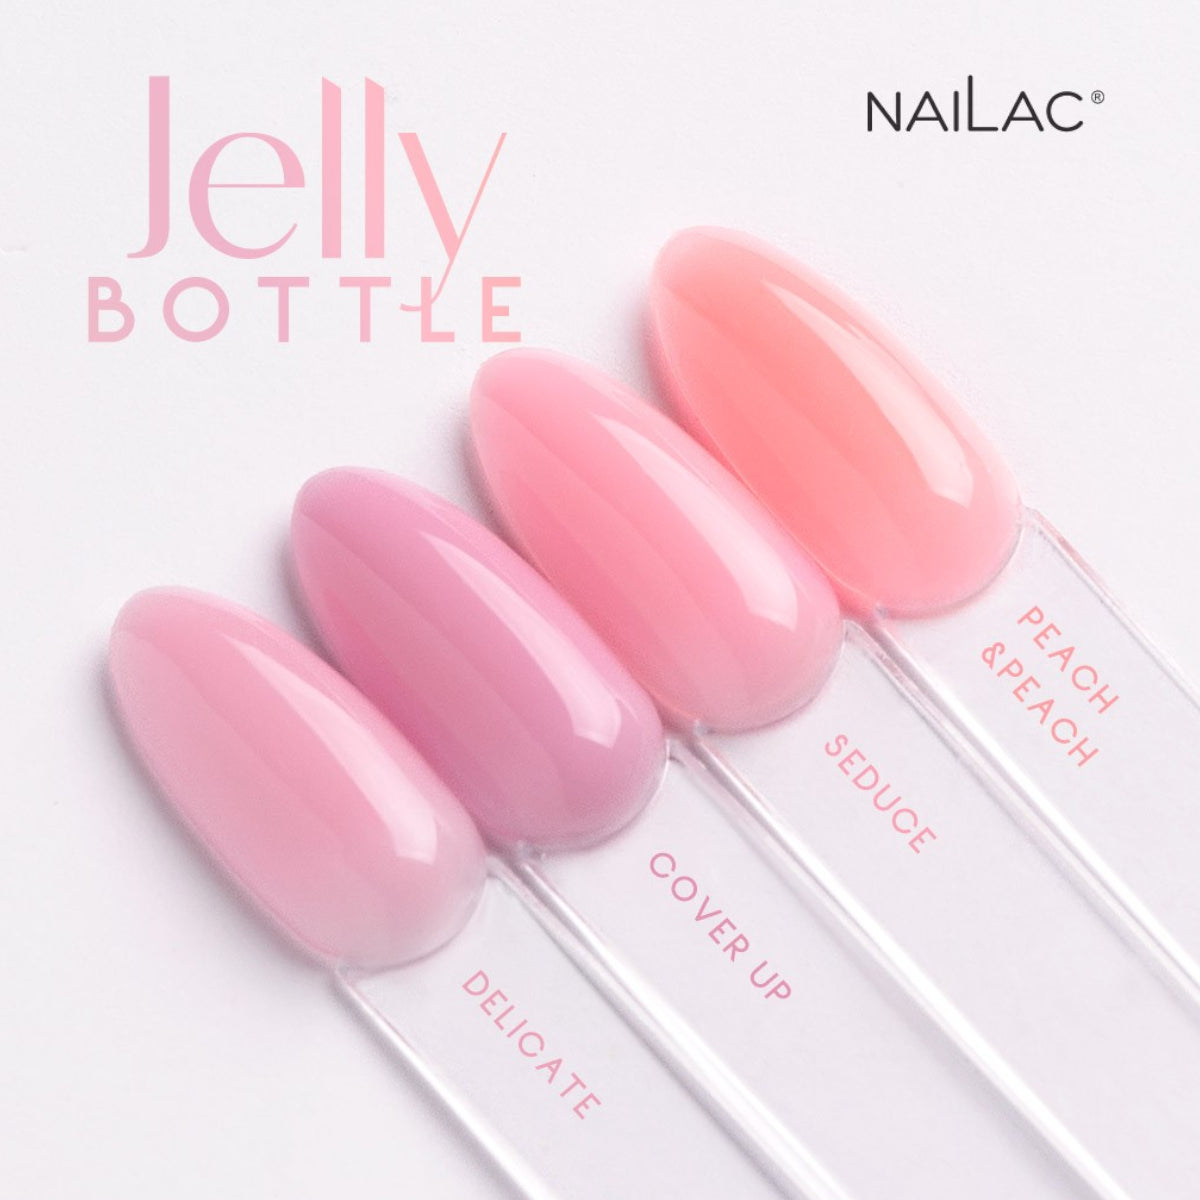 Nailac Jelly Bottle Gel Seduce Pink Collection